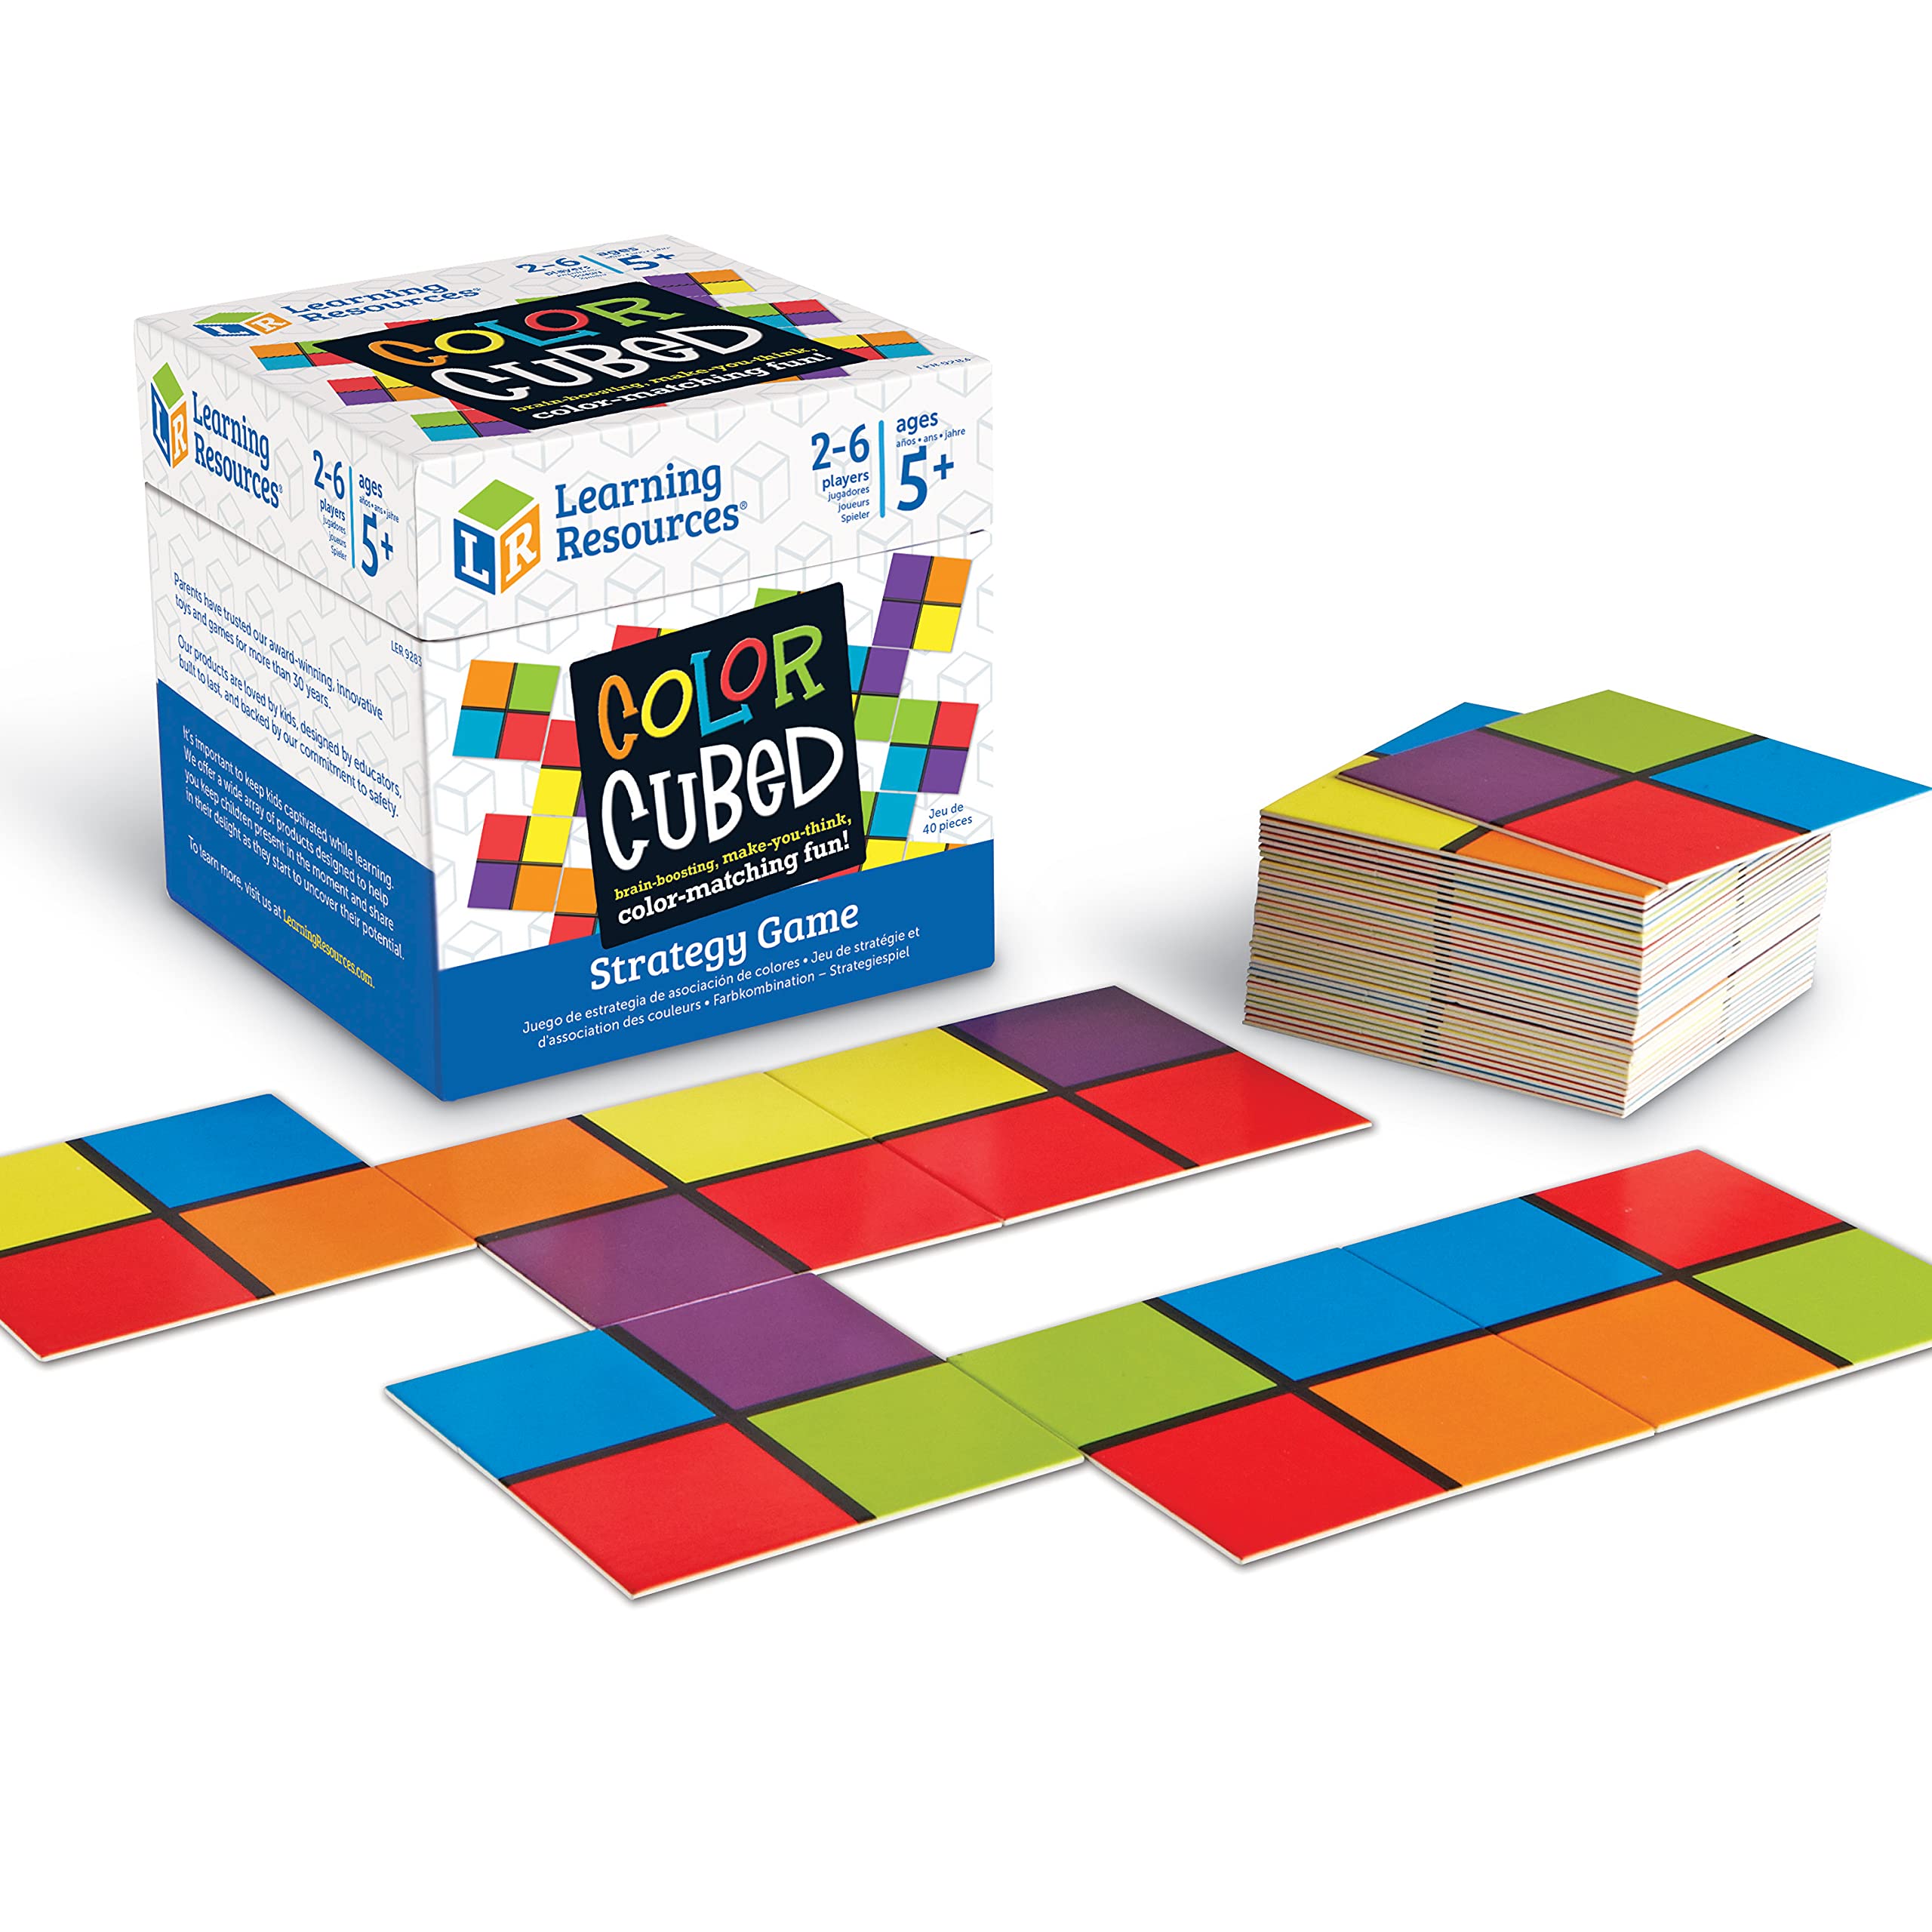 Book Cover Learning Resources Color Cubed Strategy Game, Brain Boosting Matching 2-6 Players, 40 Pieces, Ages 5+